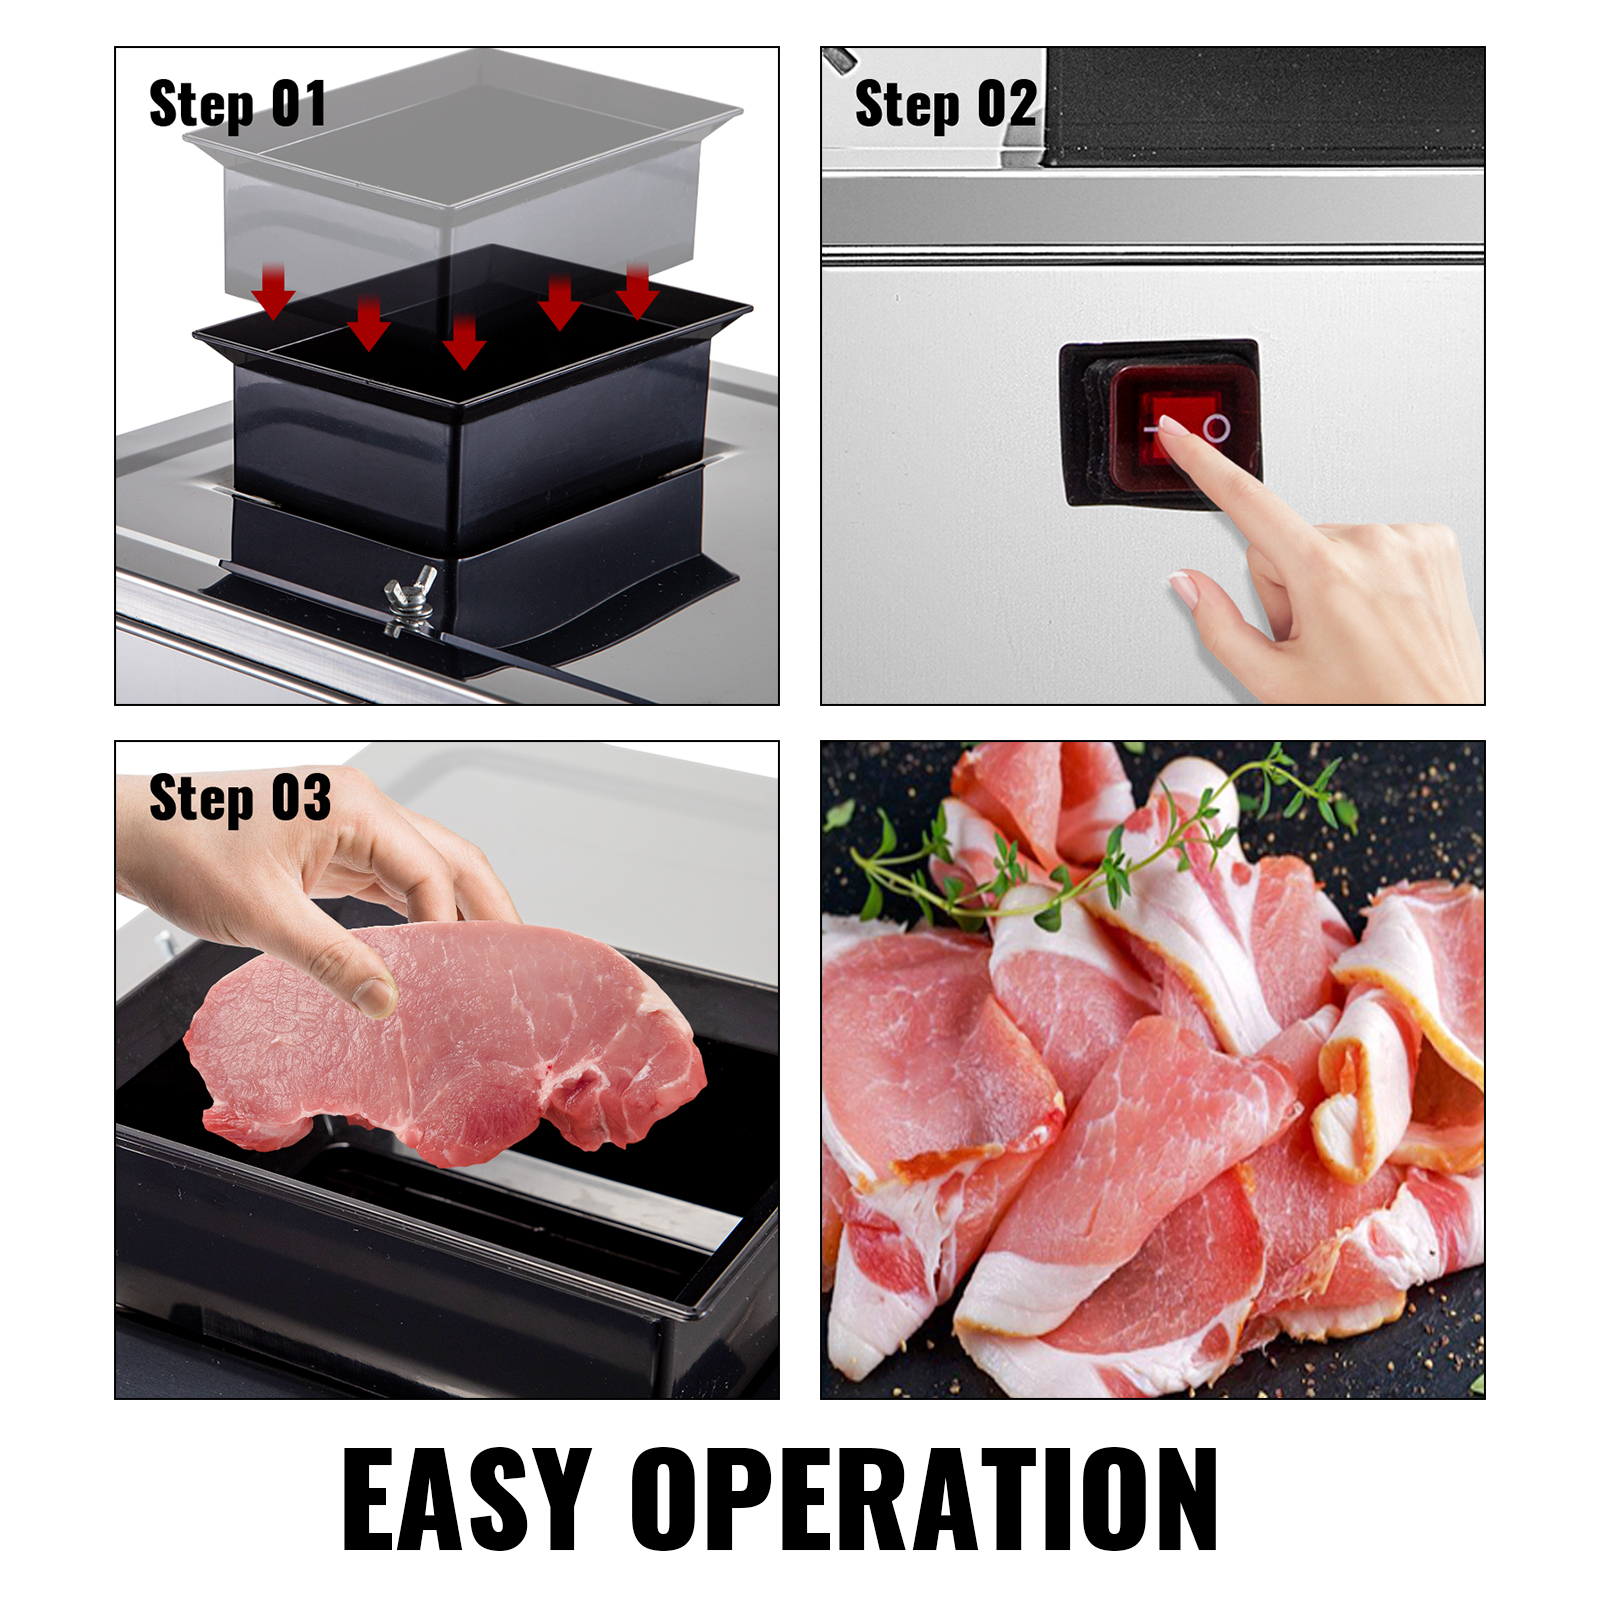 US STOCK Meat Cutting Machine Meat Shred Machine Meat Slicing Shredding Cutting Machine Manual Meat Slicer Cutting Machine Hand-cranked Meat Grinder Stainless Steel Blade for Pork Mutton Beef 